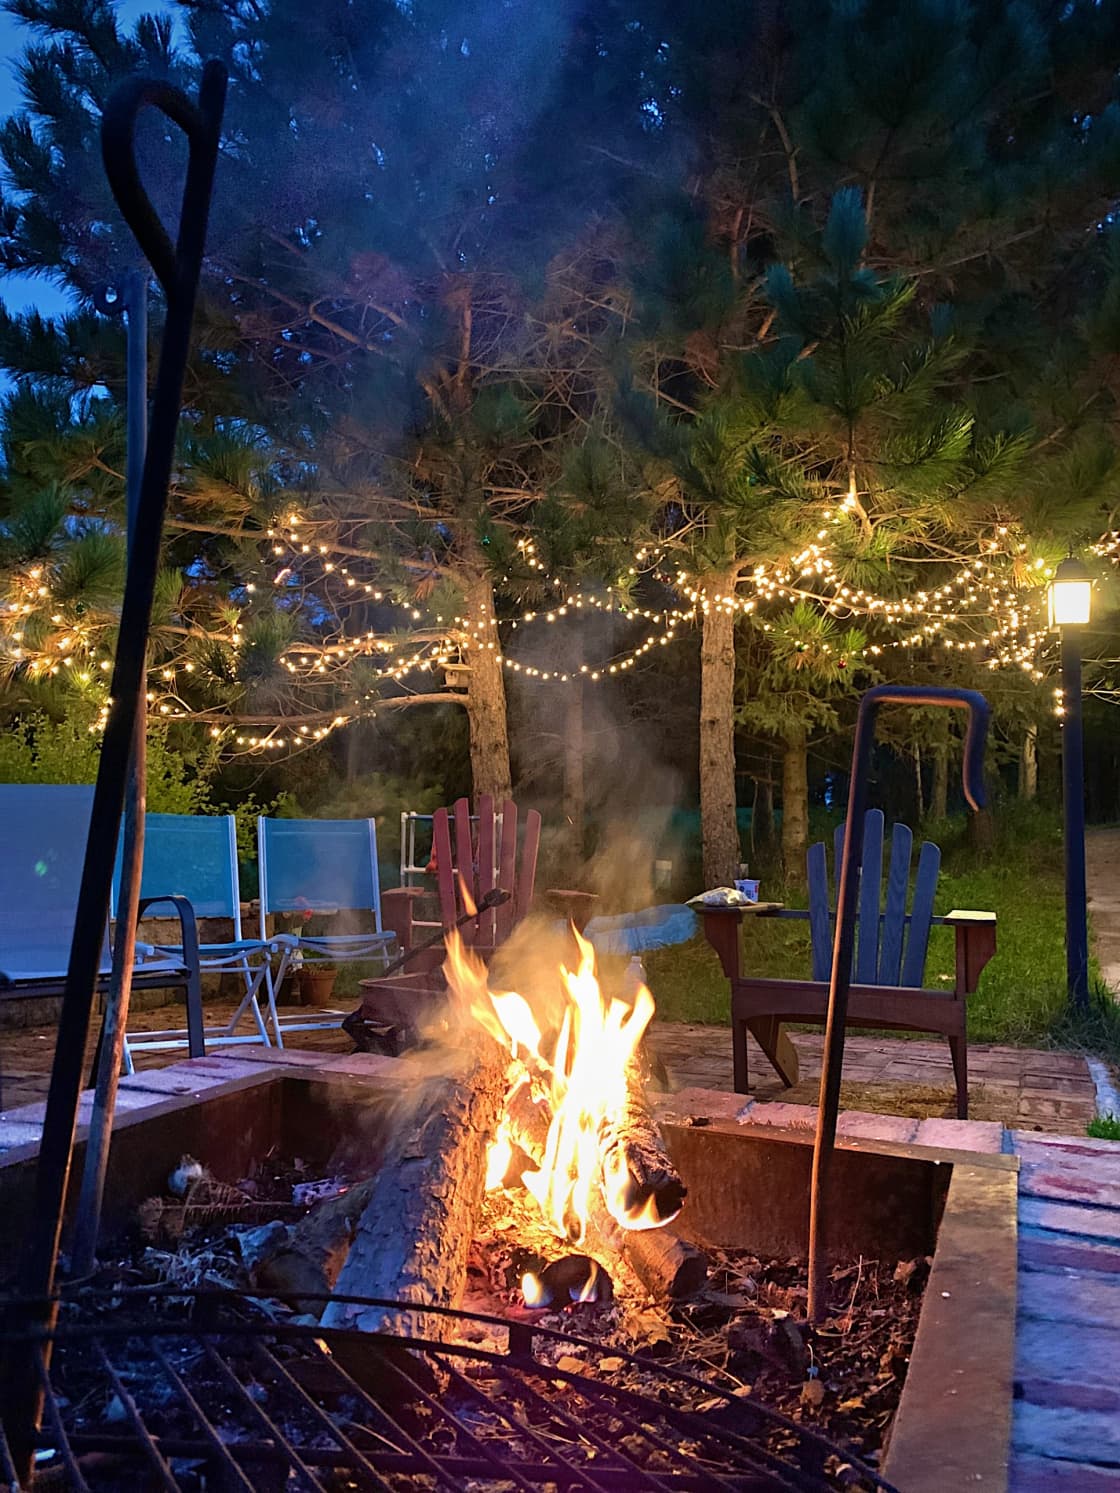 Love their lighting around the fire pit patio 